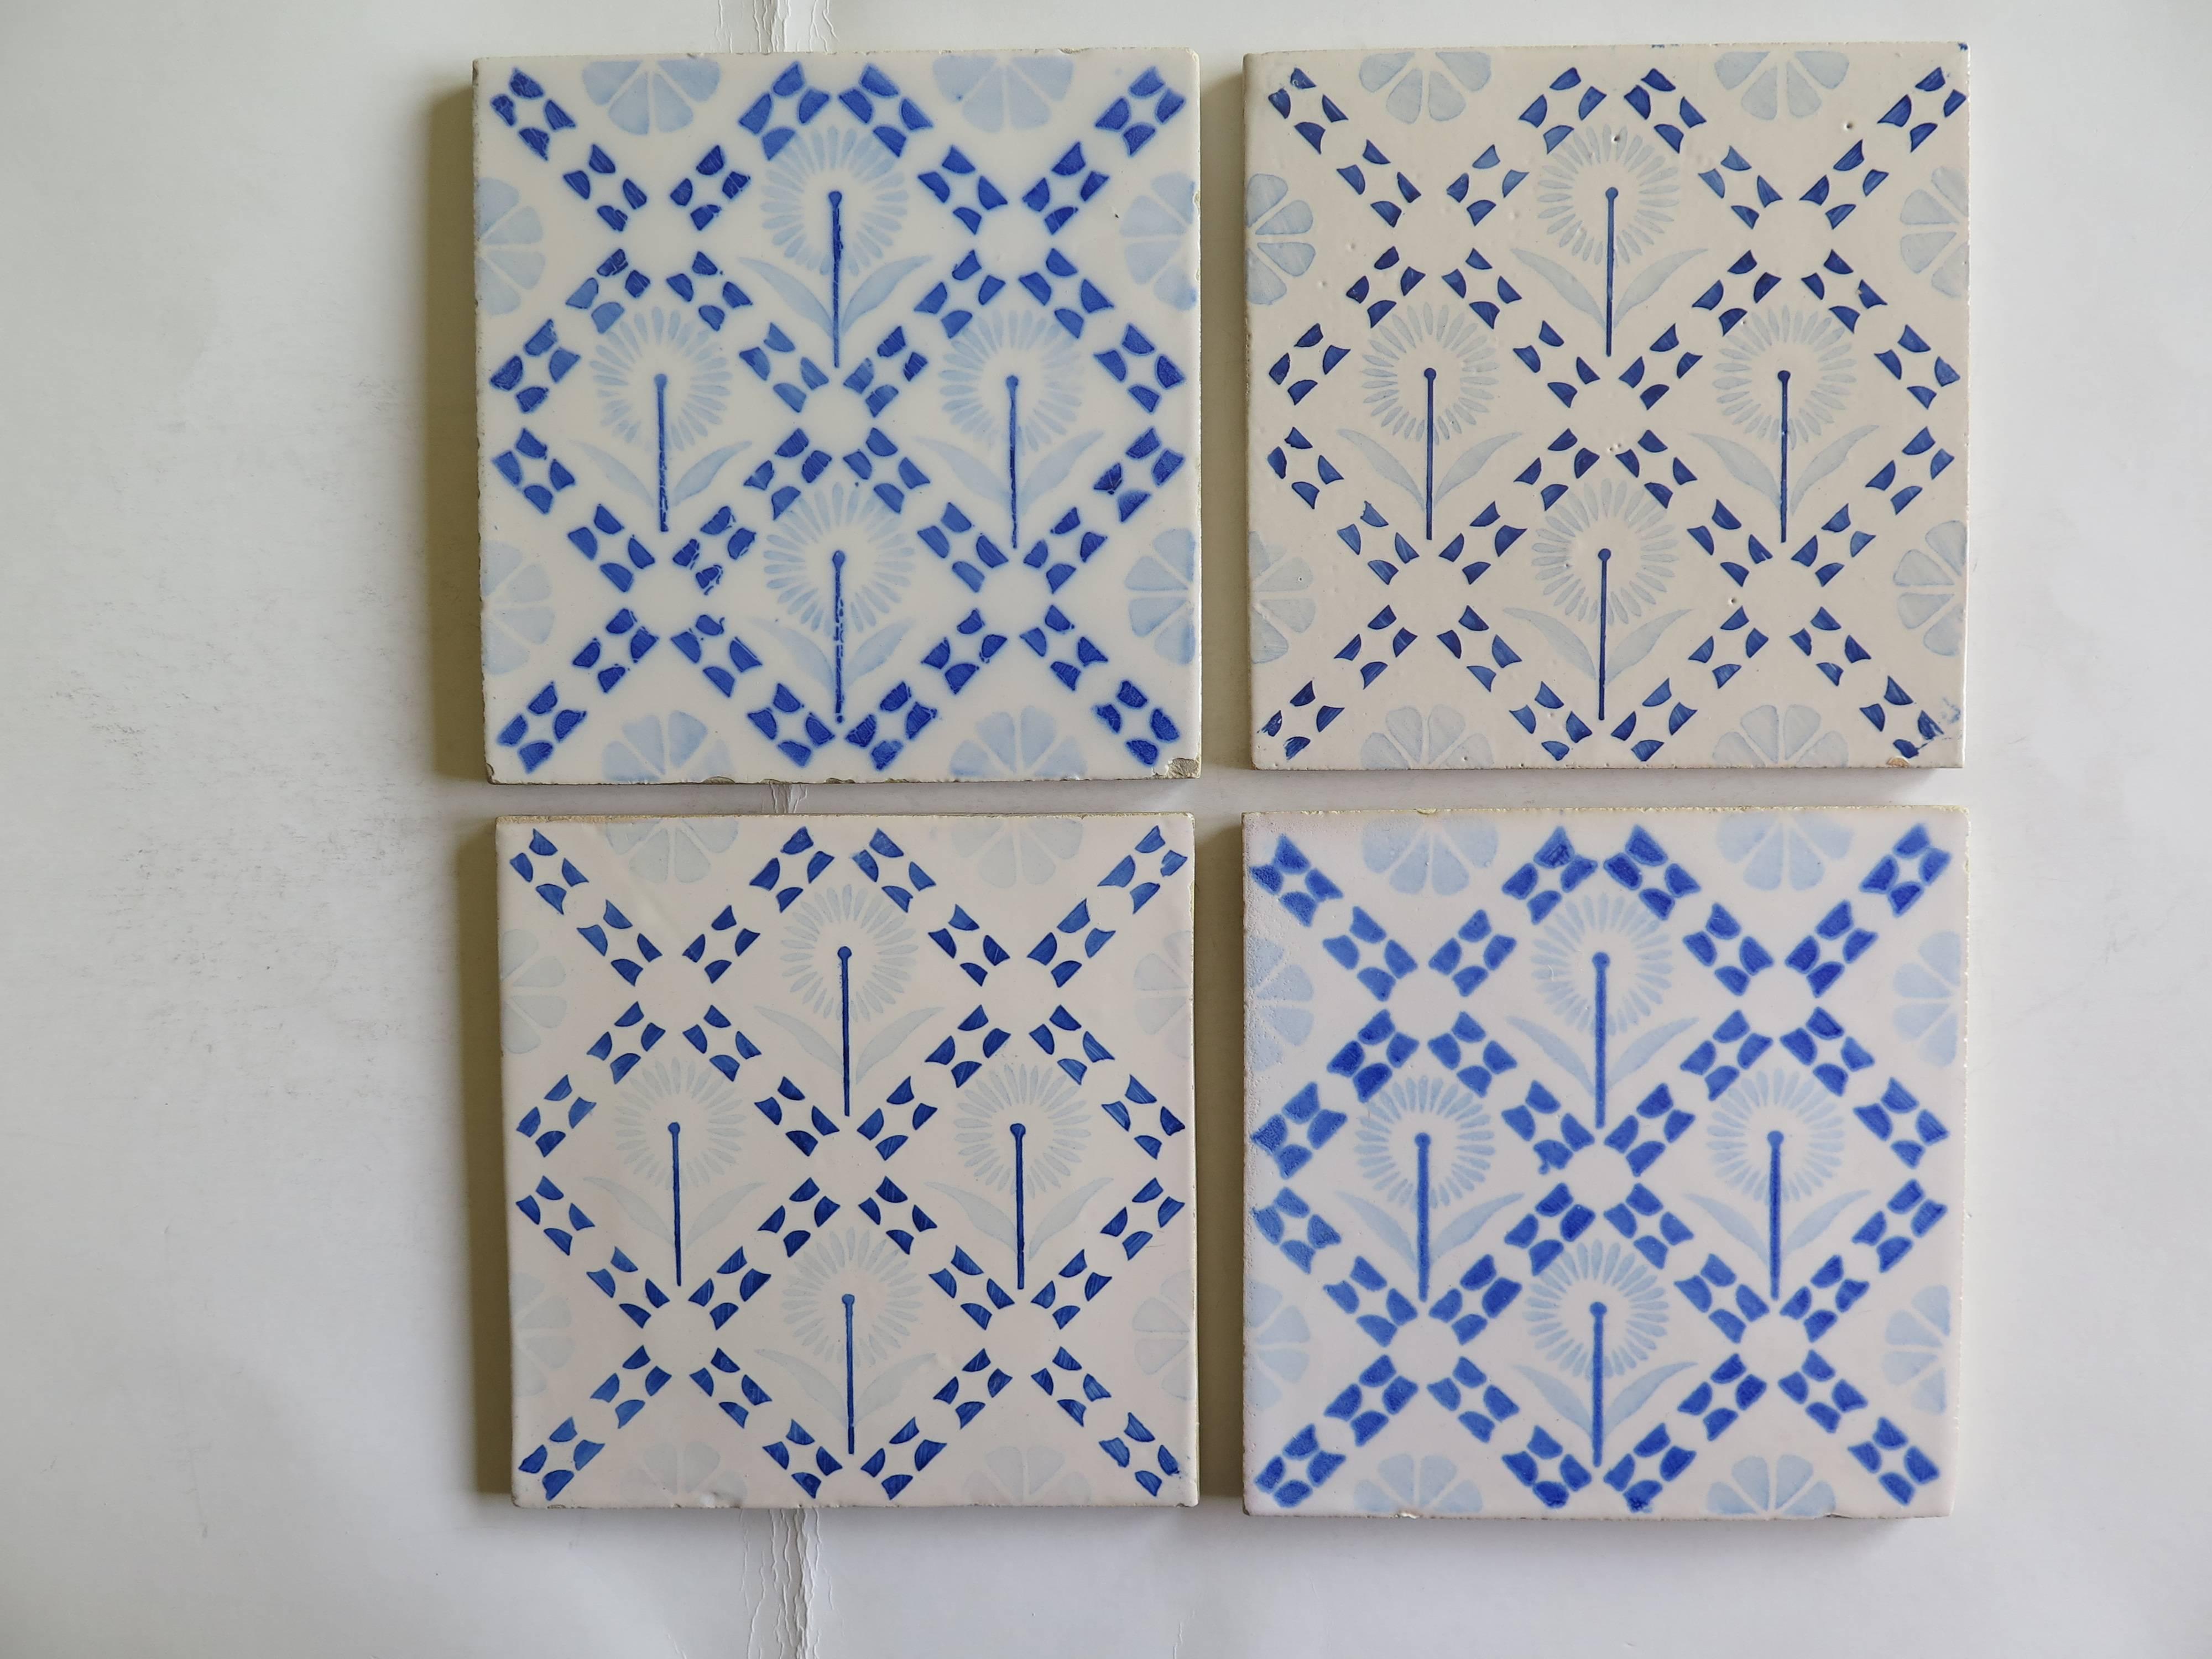 Four glazed earthenware tiles from the Art-Deco period, probably made in the Netherlands, circa 1930.

The tiles have a geometric blue and white pattern with a stylised flower design located within diagonal bordered squares.

All tiles have the